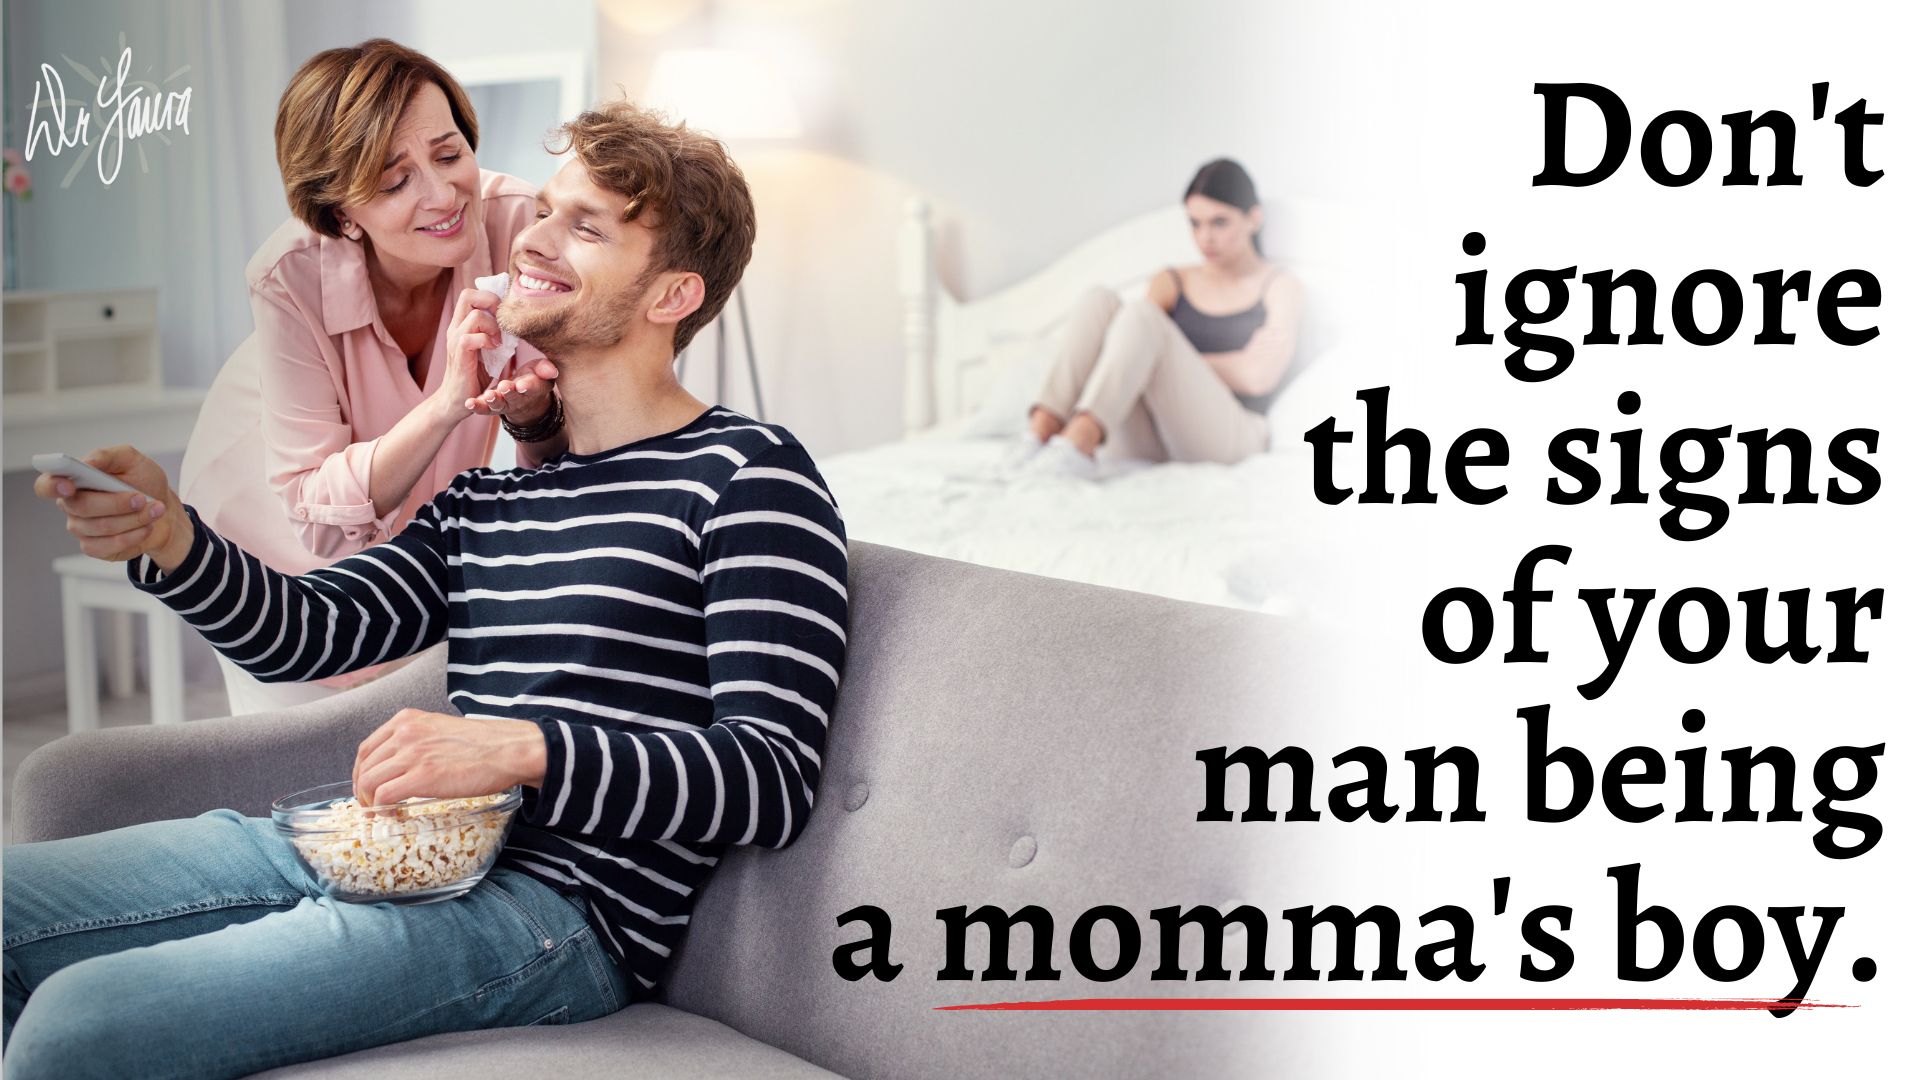 Don't ignore the signs of your man being a momma's boy